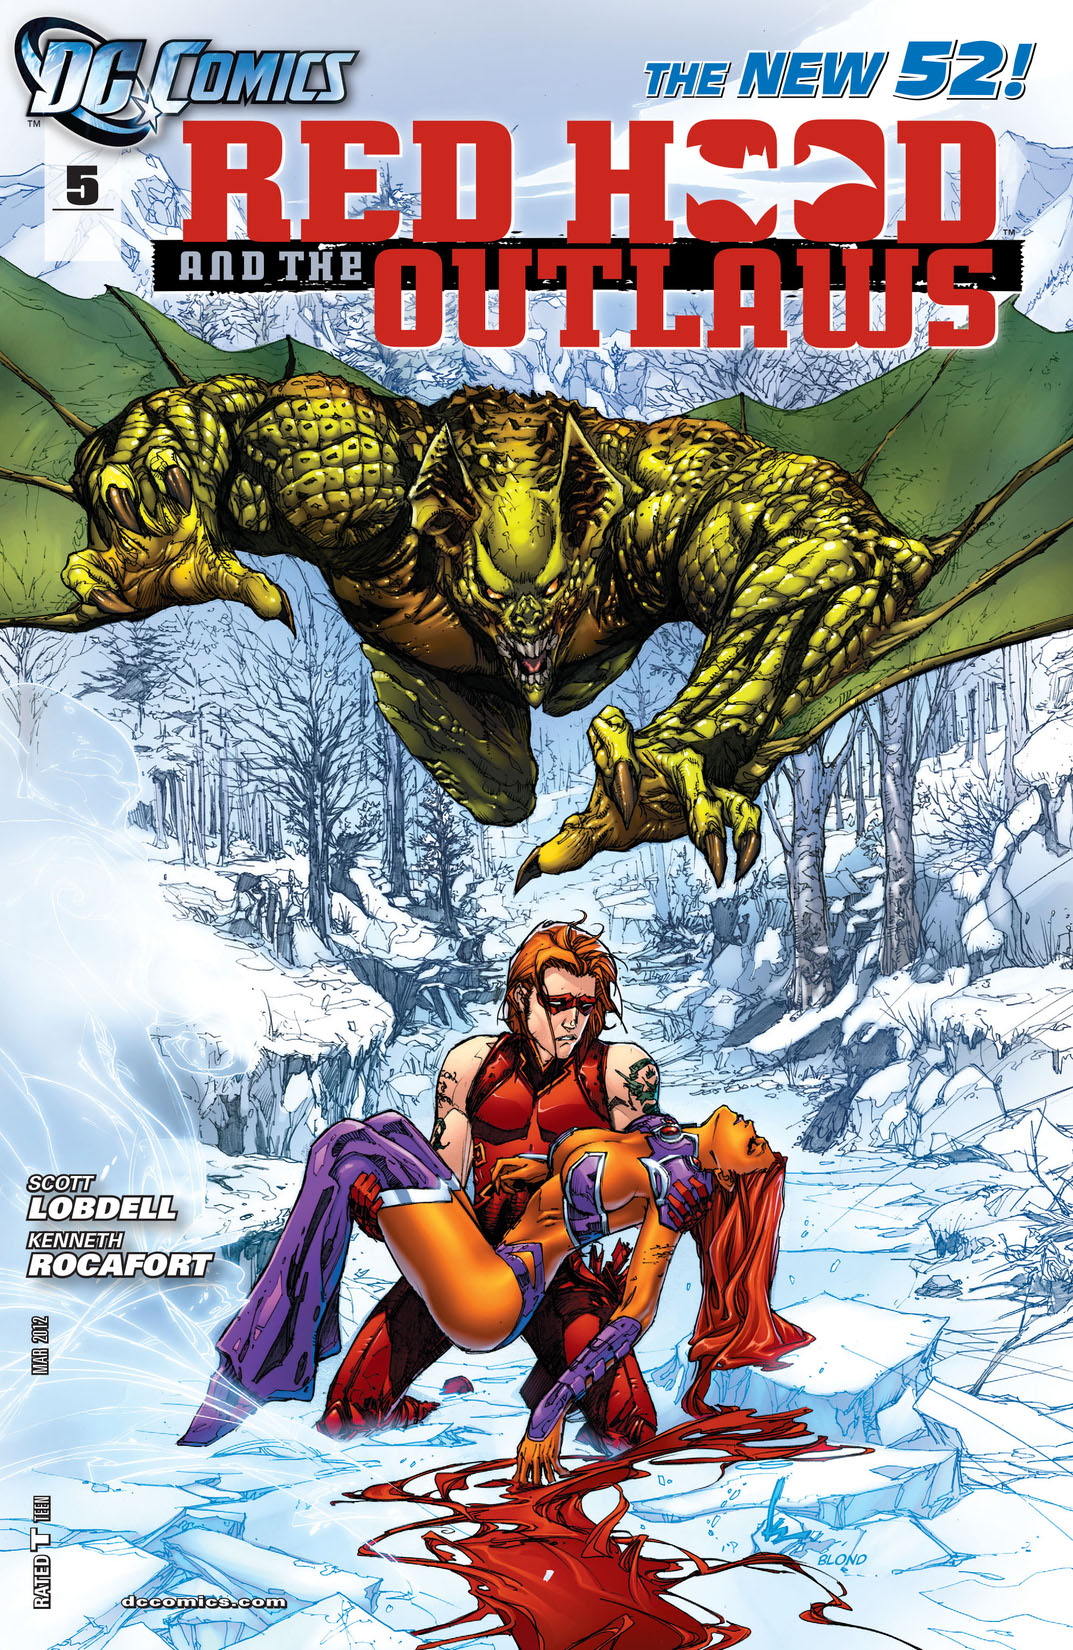 Red Hood and the Outlaws (2011-) #5 preview images